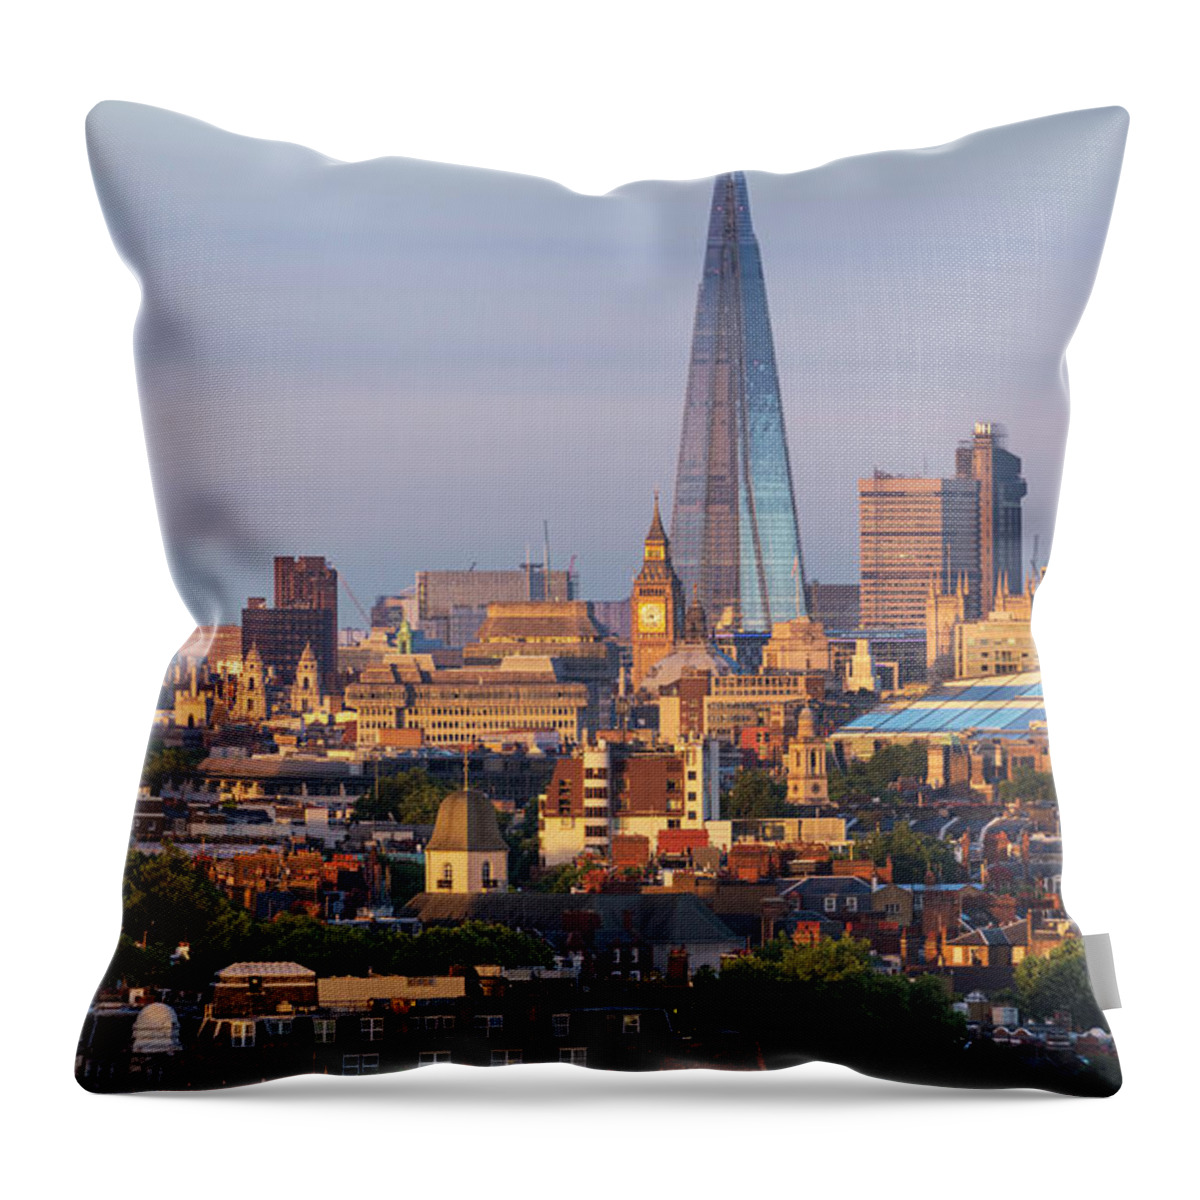 Tranquility Throw Pillow featuring the photograph City Skyline In Late Evening Sunlight by Simon Butterworth